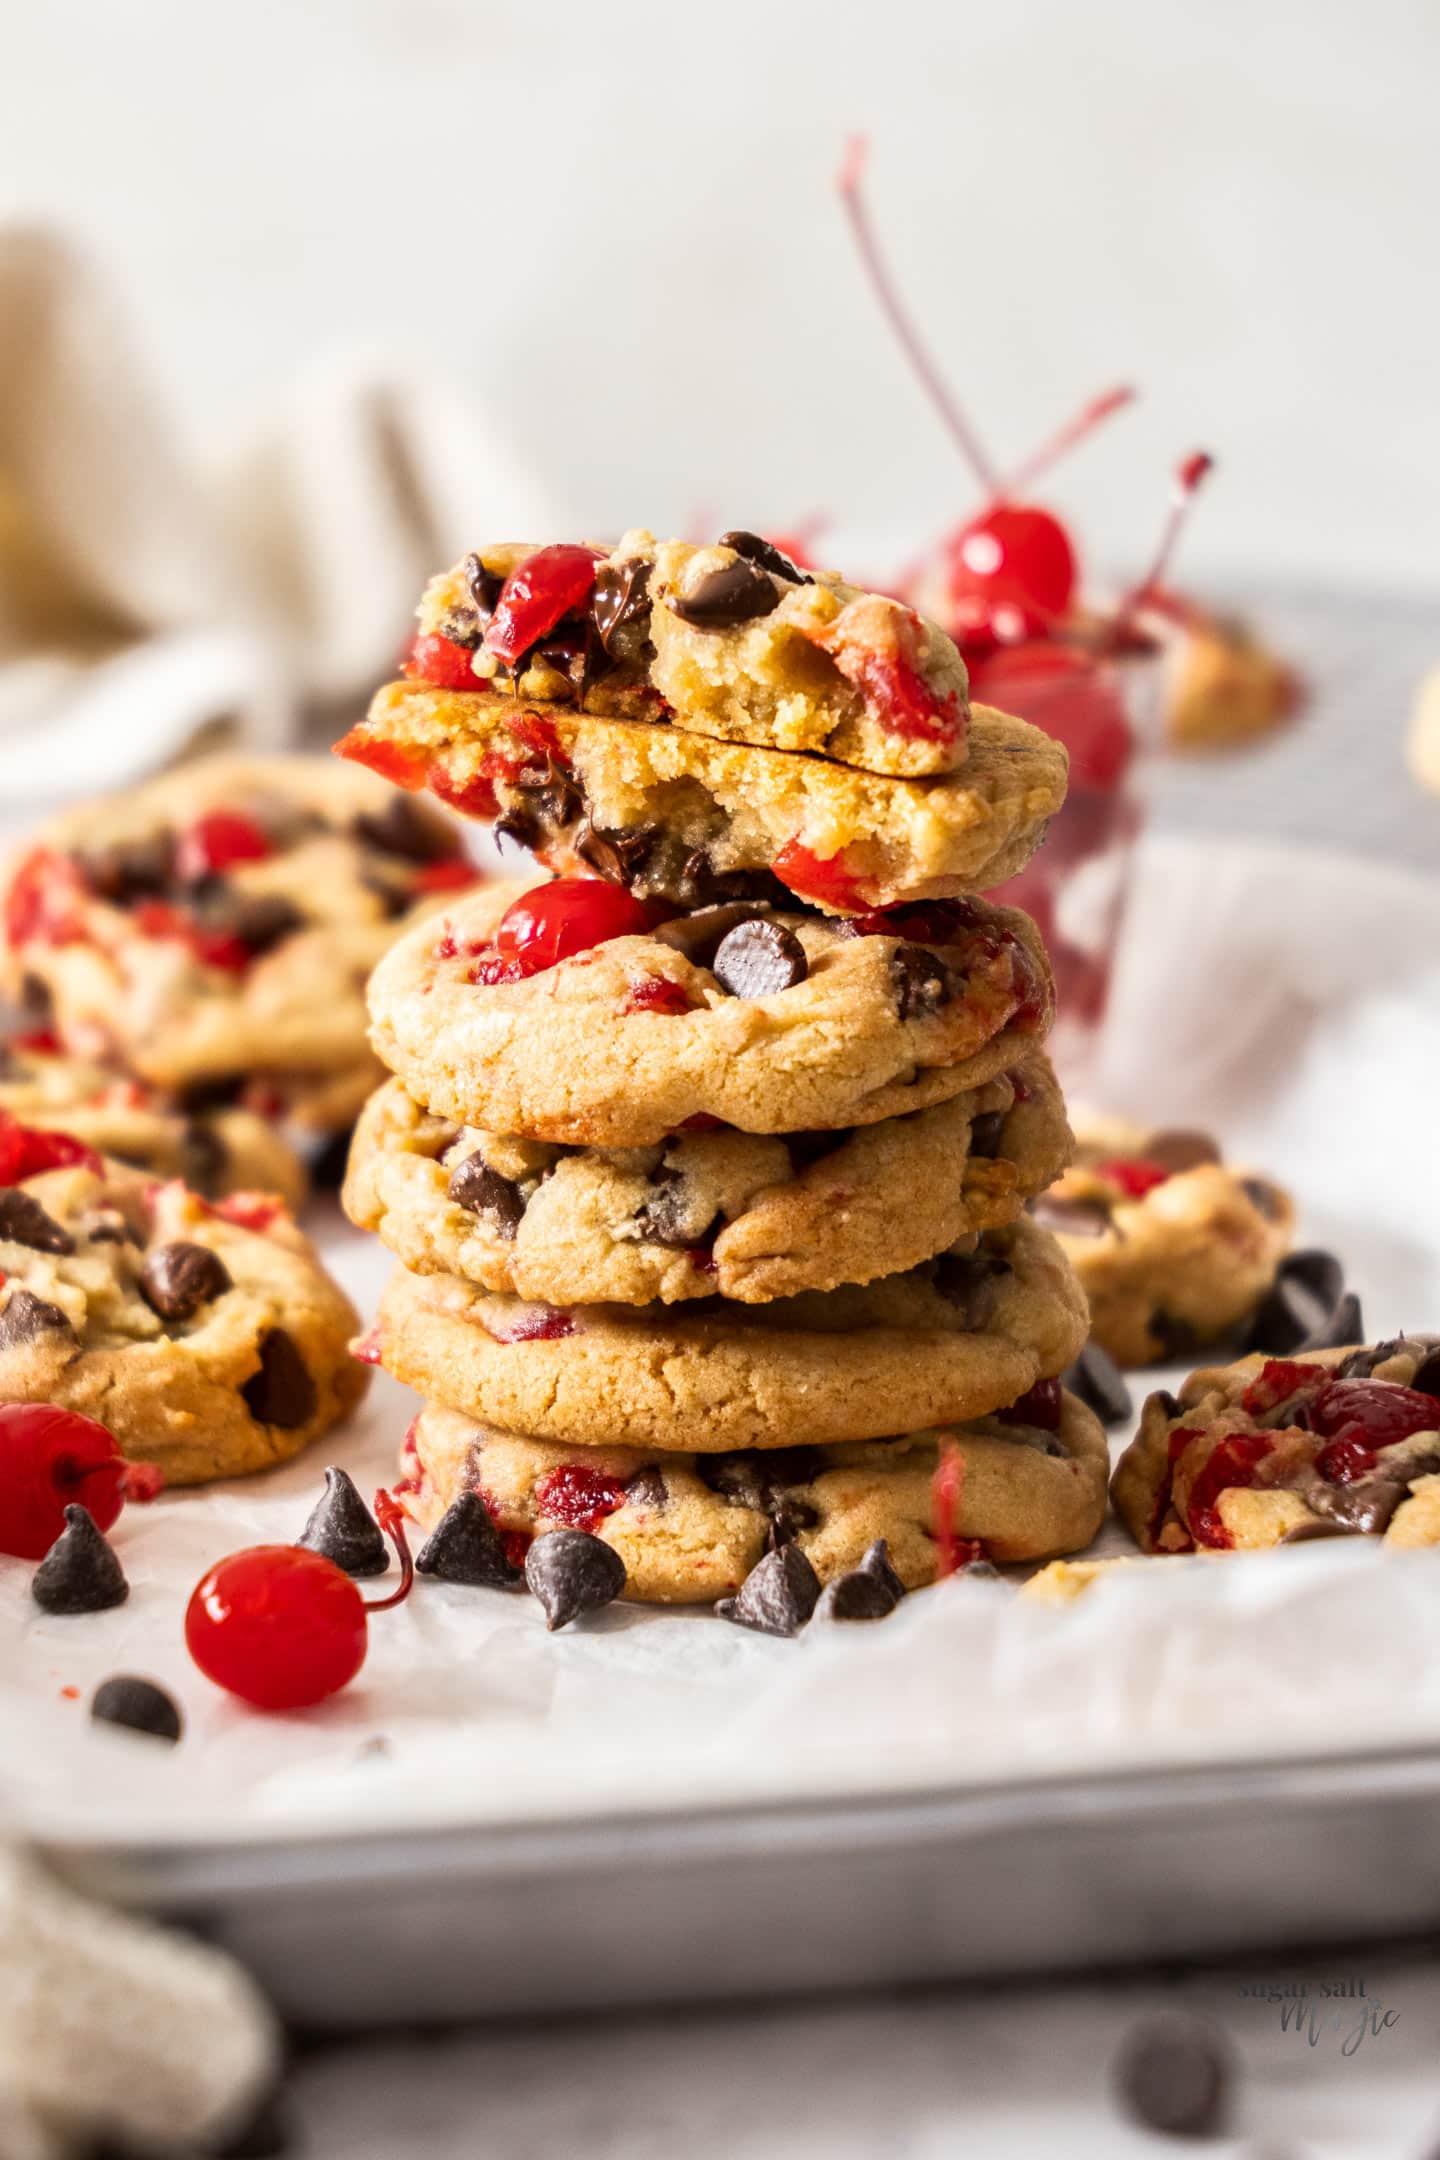 A stack of cherry chocolate chip cookies with the top one broken in half to show inside.